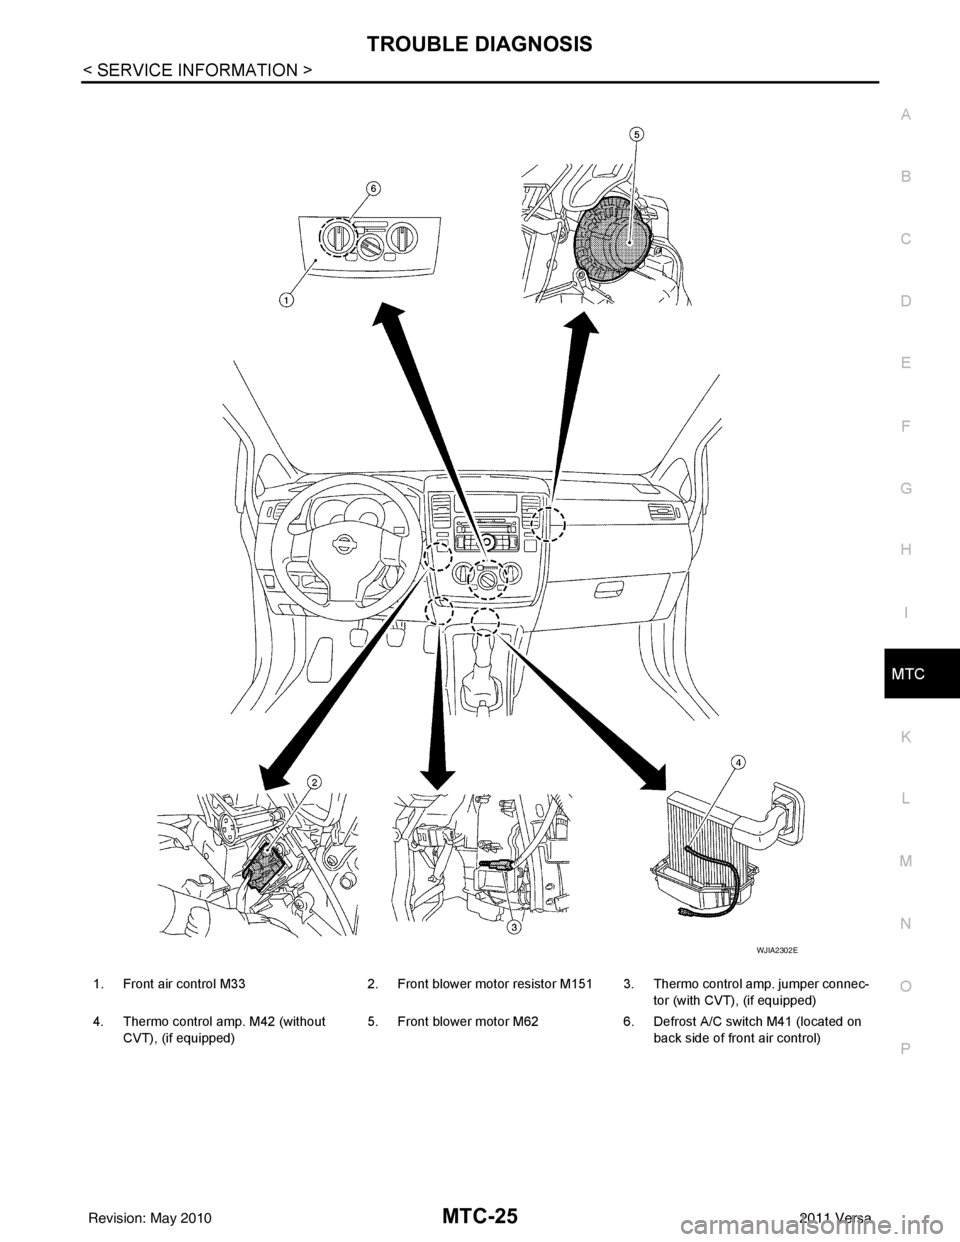 NISSAN LATIO 2011  Service Repair Manual TROUBLE DIAGNOSISMTC-25
< SERVICE INFORMATION >
C
DE
F
G H
I
K L
M A
B
MTC
N
O P
1. Front air control M33 2. Front blower motor resistor M151 3. Thermo control amp. jumper connec-
tor (with CVT), (if 